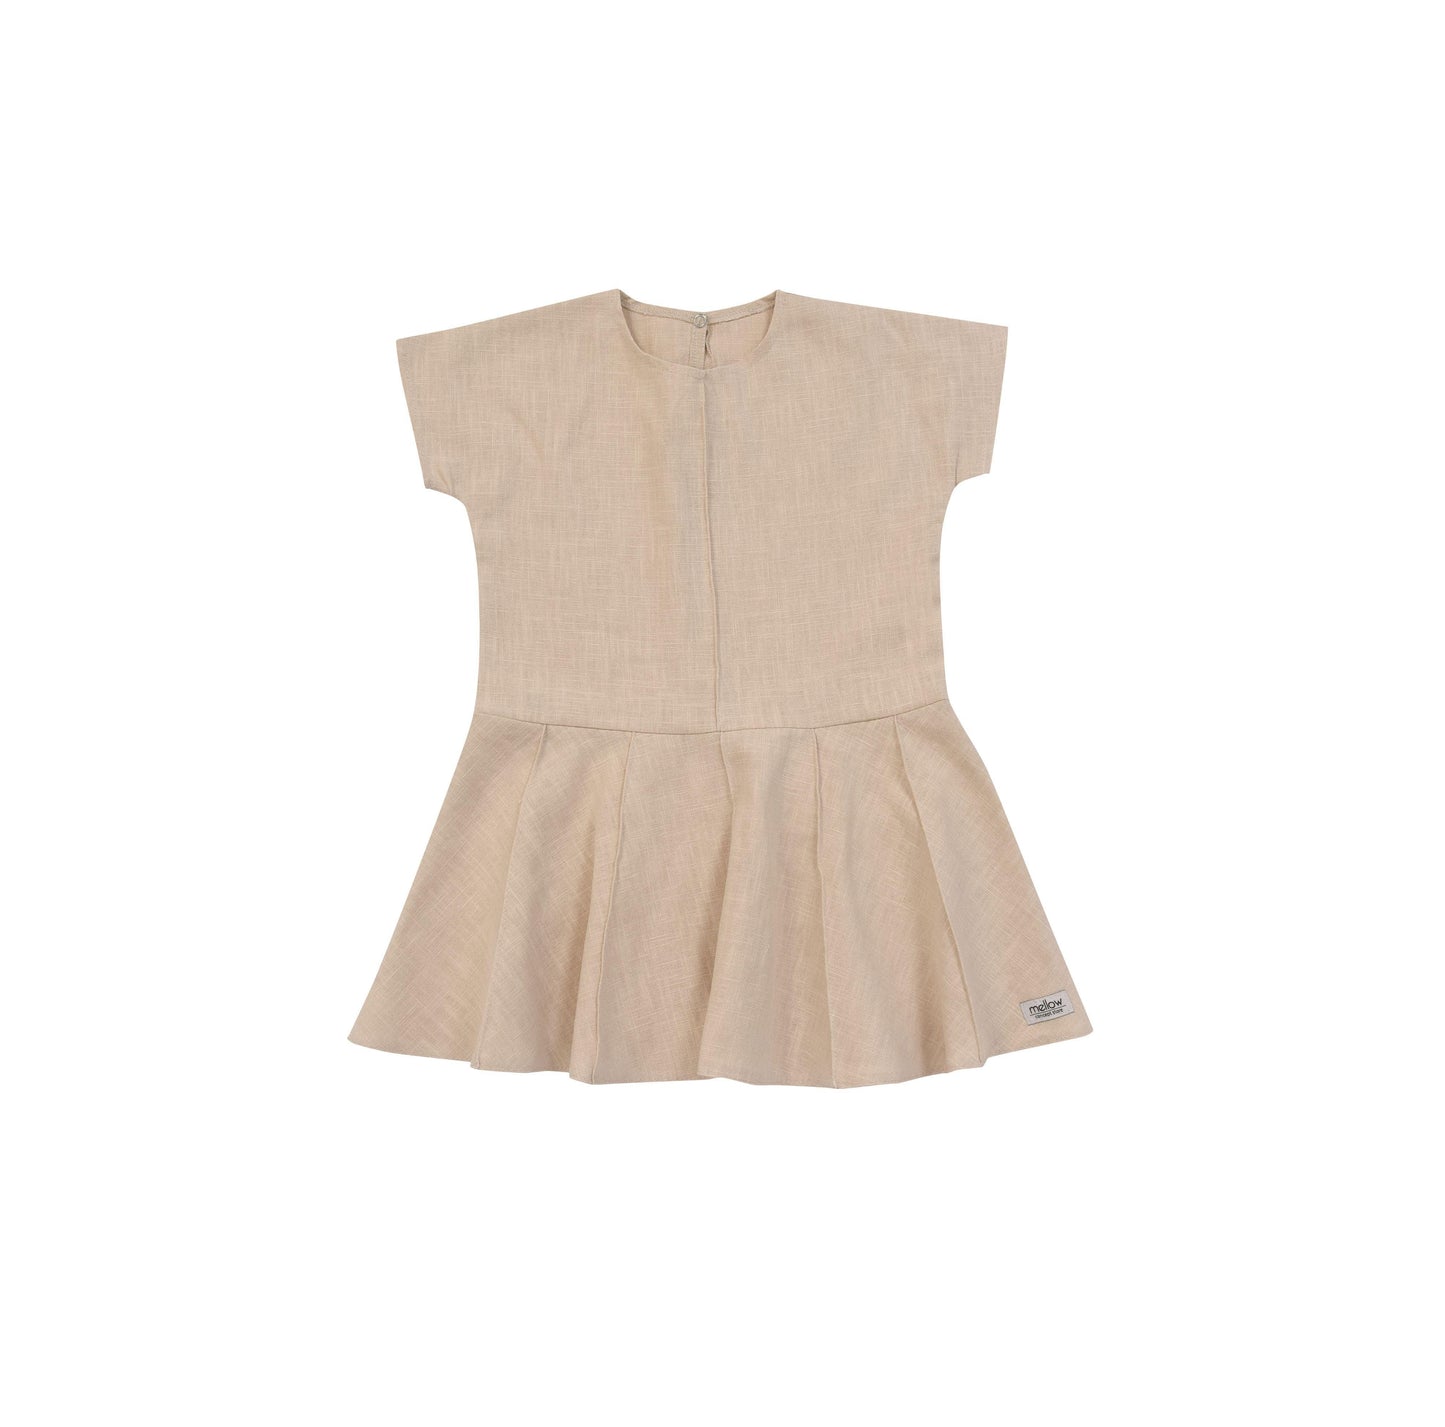 Sentence with product name and brand name inserted: A Ramie Baby/Kid Dress in Beige from Mellow Concept Store, made of ramie fabric which is gentle on delicate skin.